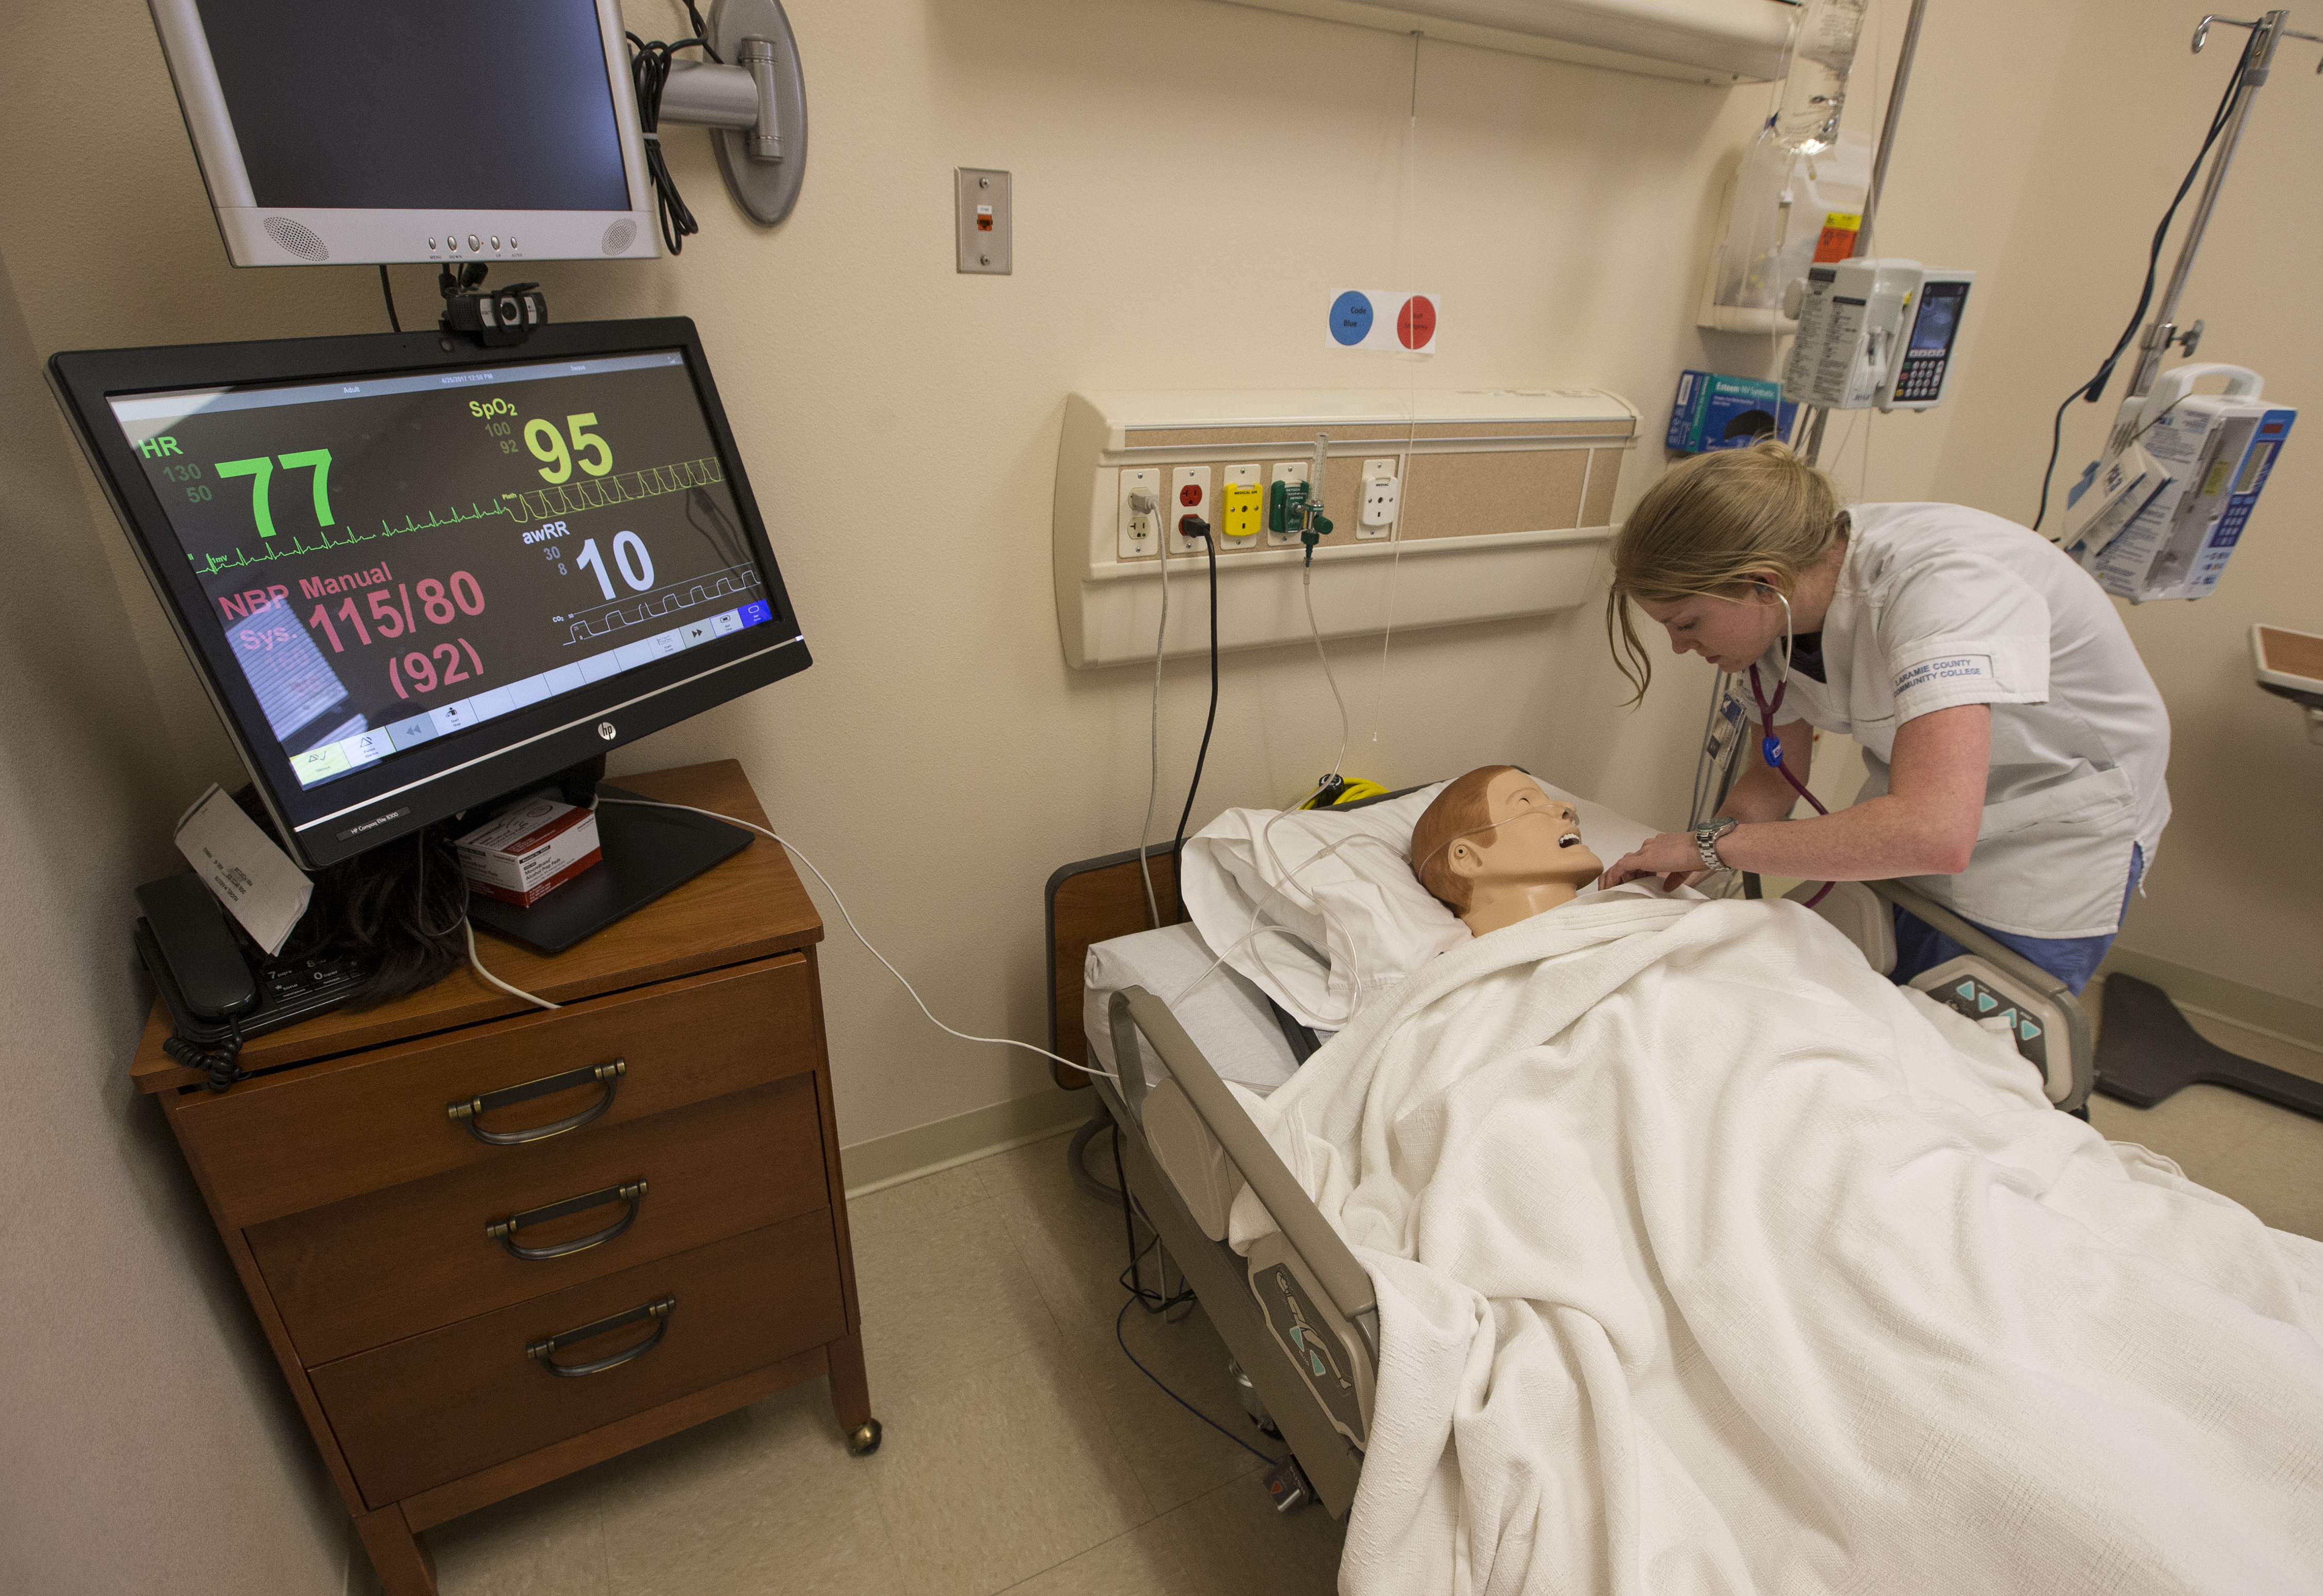 Laramie County students are using nursing school mannequins since many hospitals are not accepting students on site, but many graduates are saying that the simulation mannequins have increased their engagement.